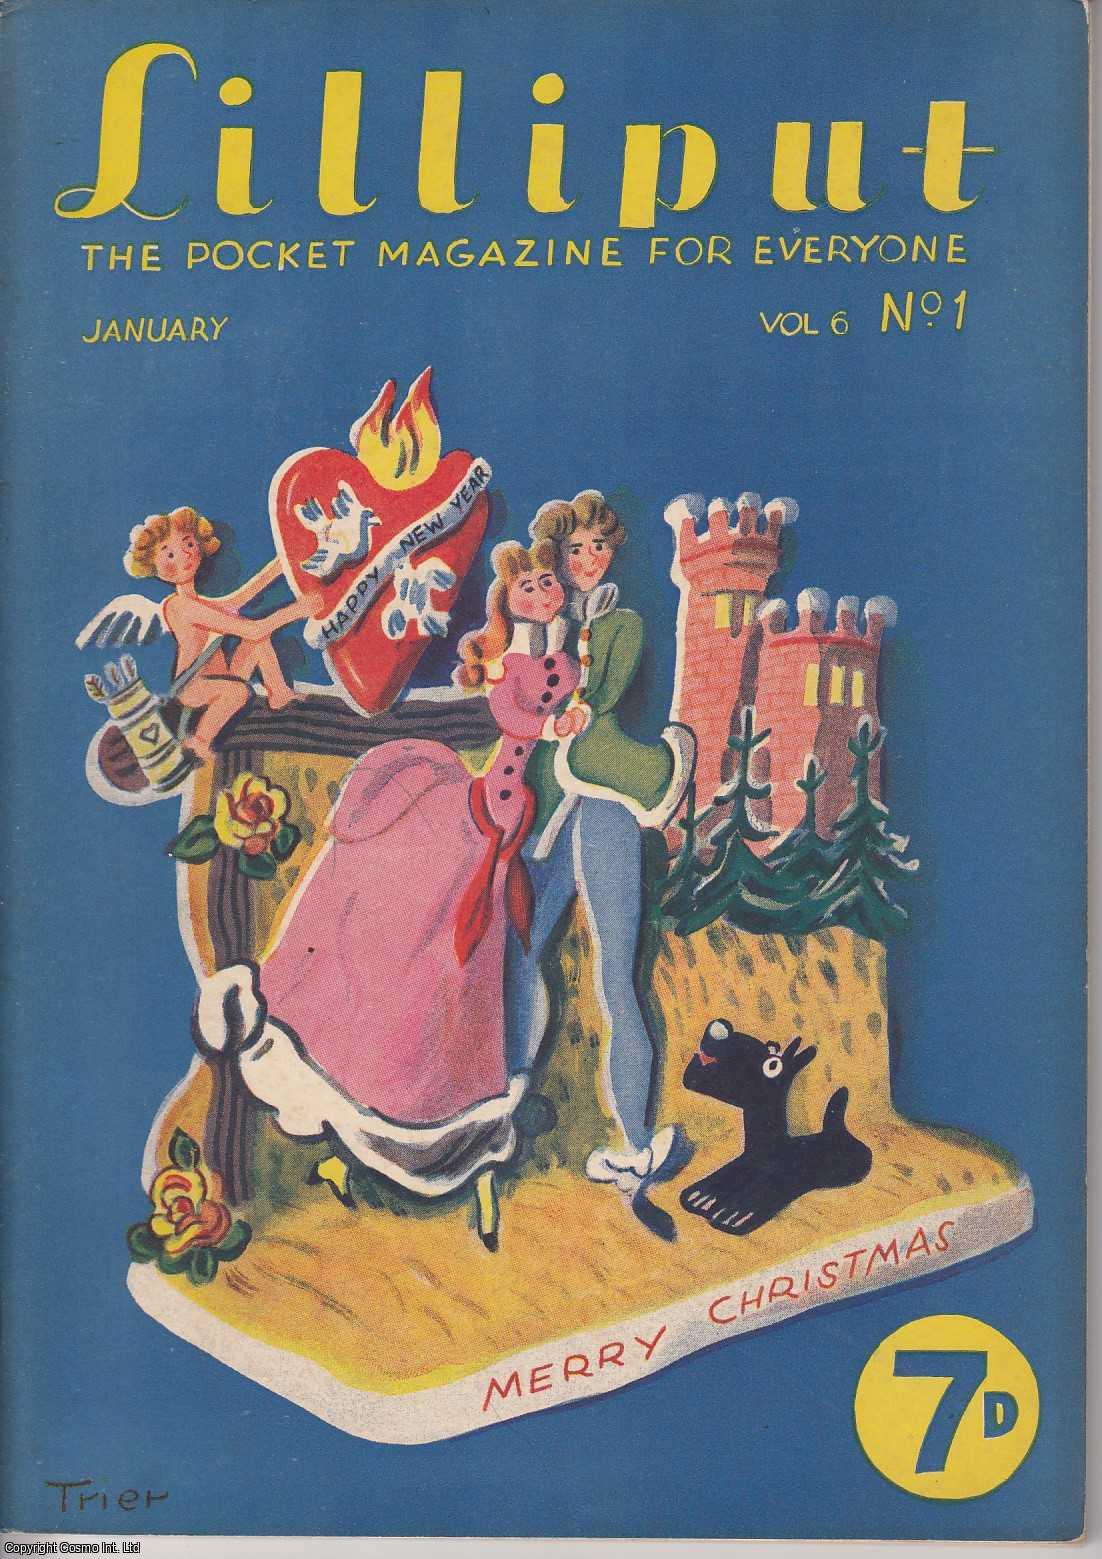 Lilliput - Lilliput Magazine. January 1940. Vol.6 no.1. Issue no. 31. Edward Dearing, Harold Masters, Leslie Lancaster, and other pieces.